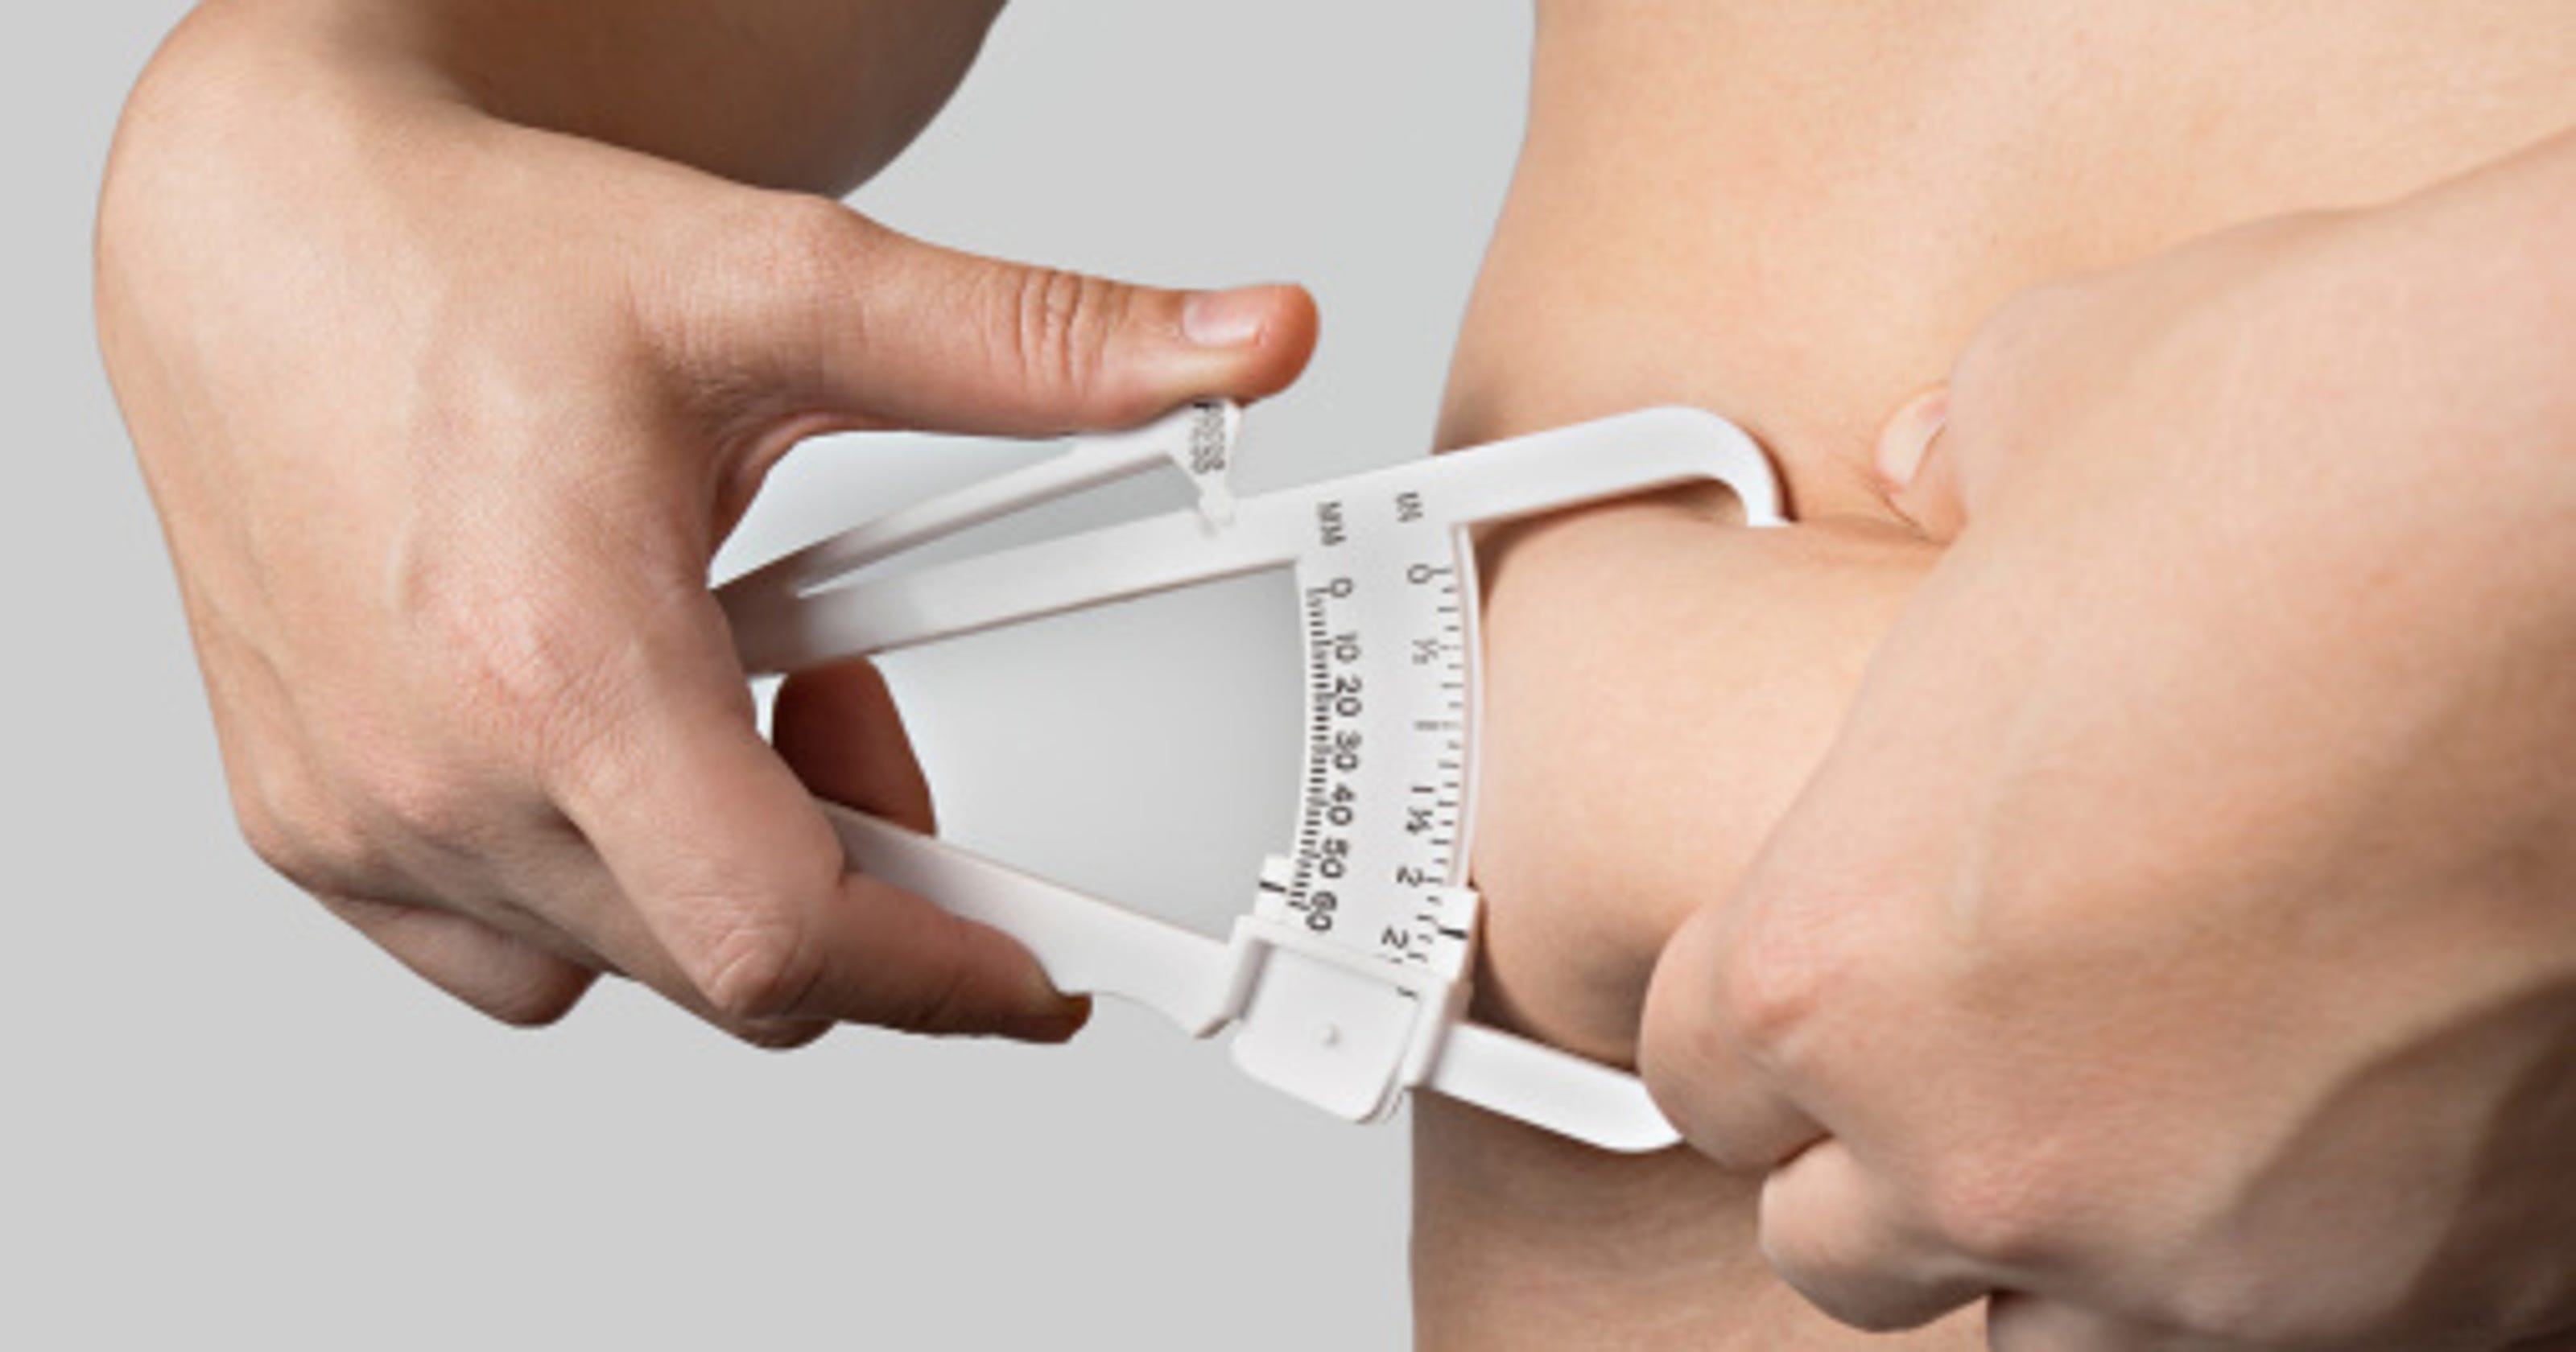 measuring-body-fat-skinfold-technique-the-pinch-test-bioelectrical-impedance-bmi-or